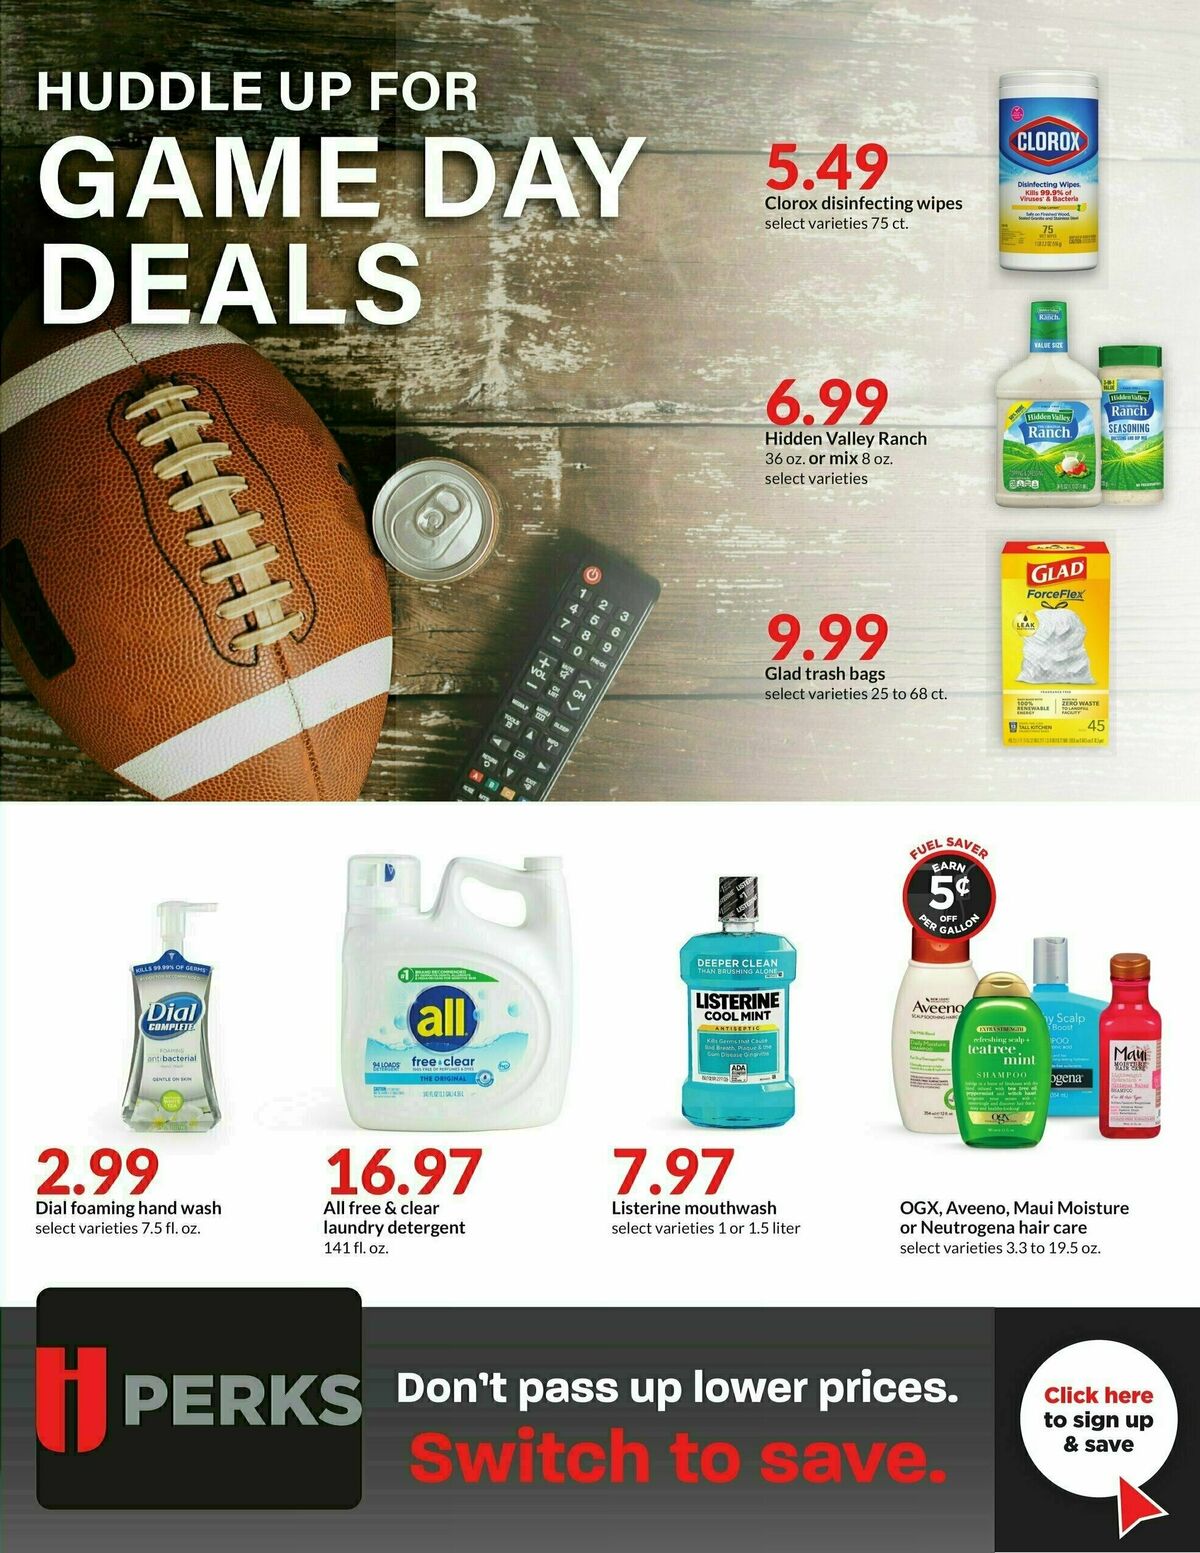 Hy-Vee February Monthly Deals Weekly Ad from February 1